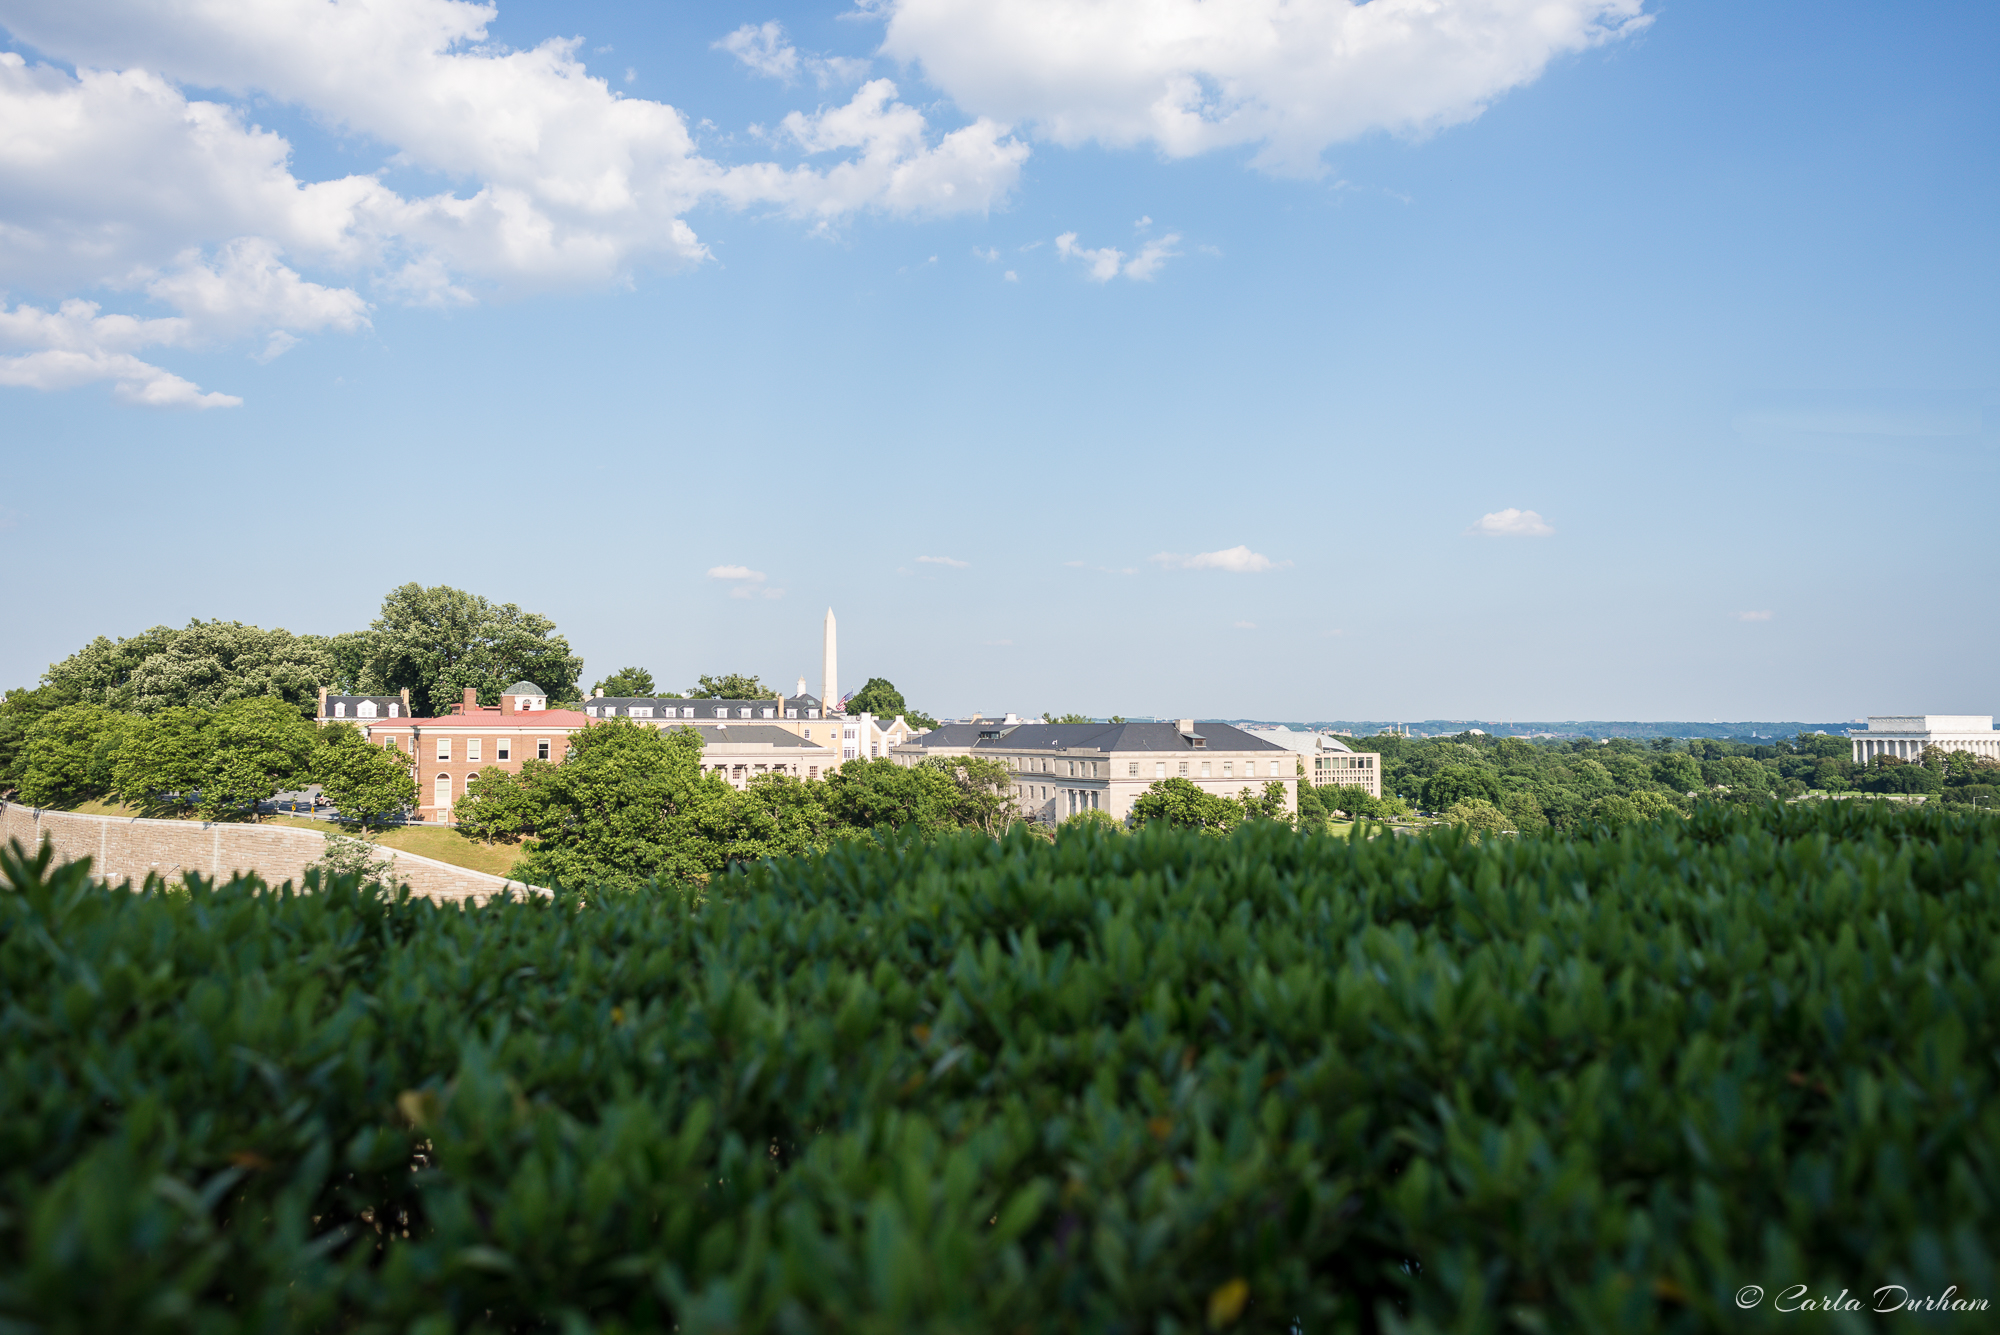 Views from the Kennedy Center roof top terrace - Photographer Carla Durham - 50 Cities and counting